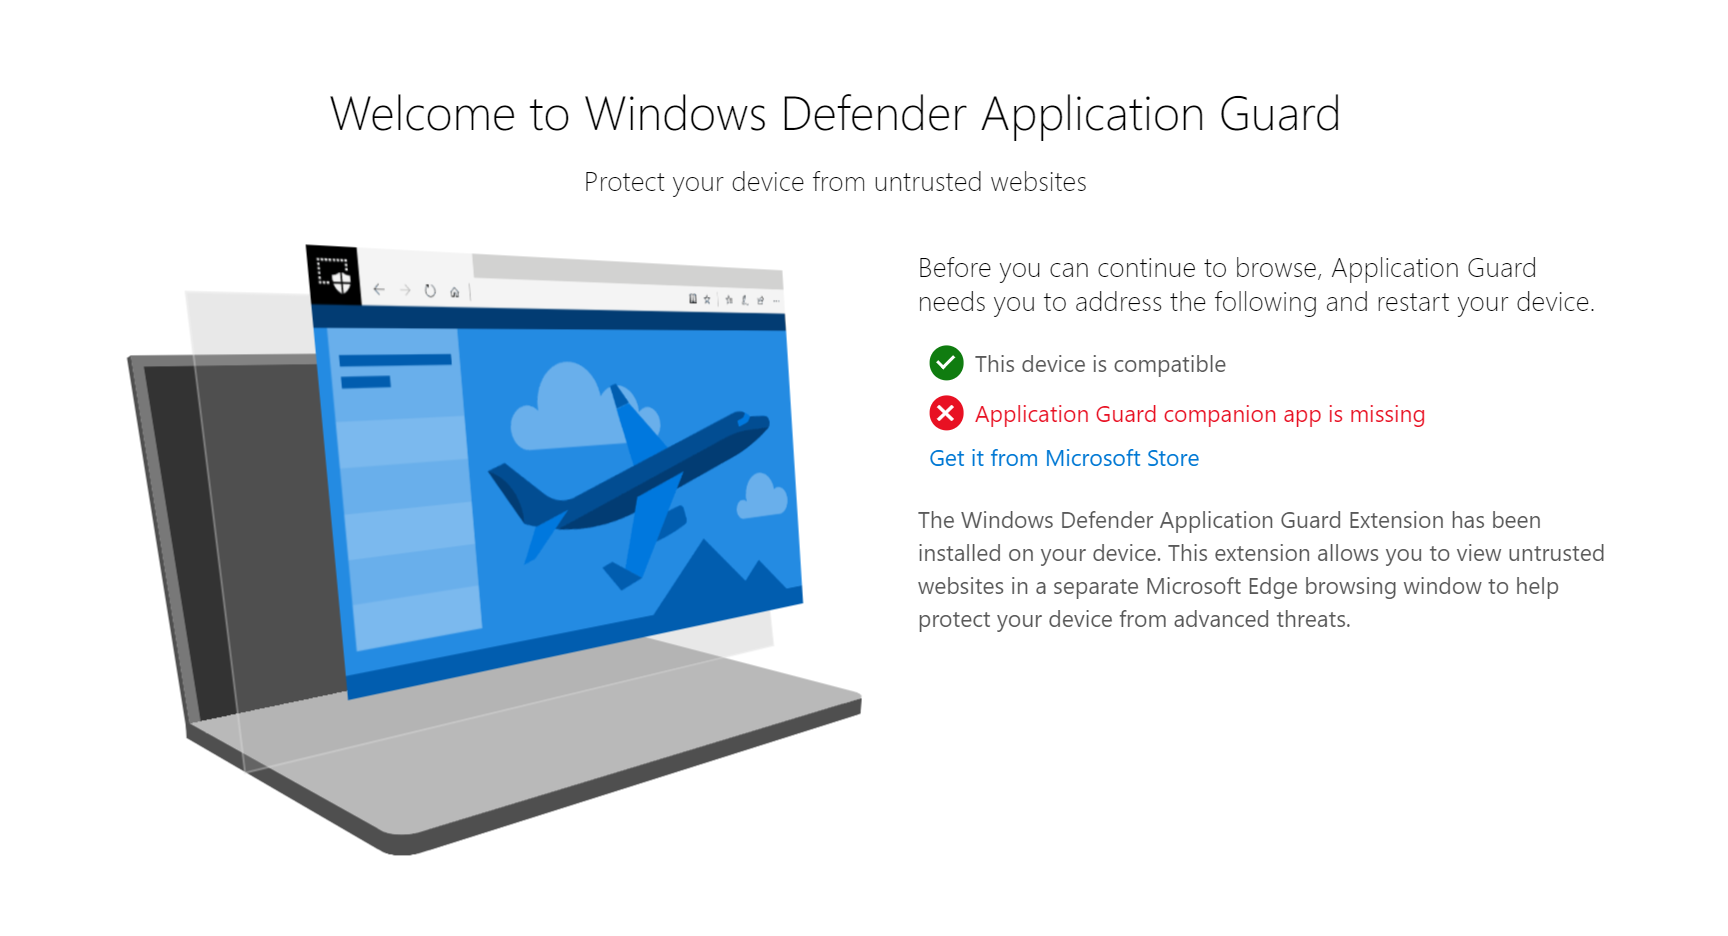 Windows Defender cannot guard from online Security threat while browsing and downloading... windows-defender-application-guard-components-not-complete.png